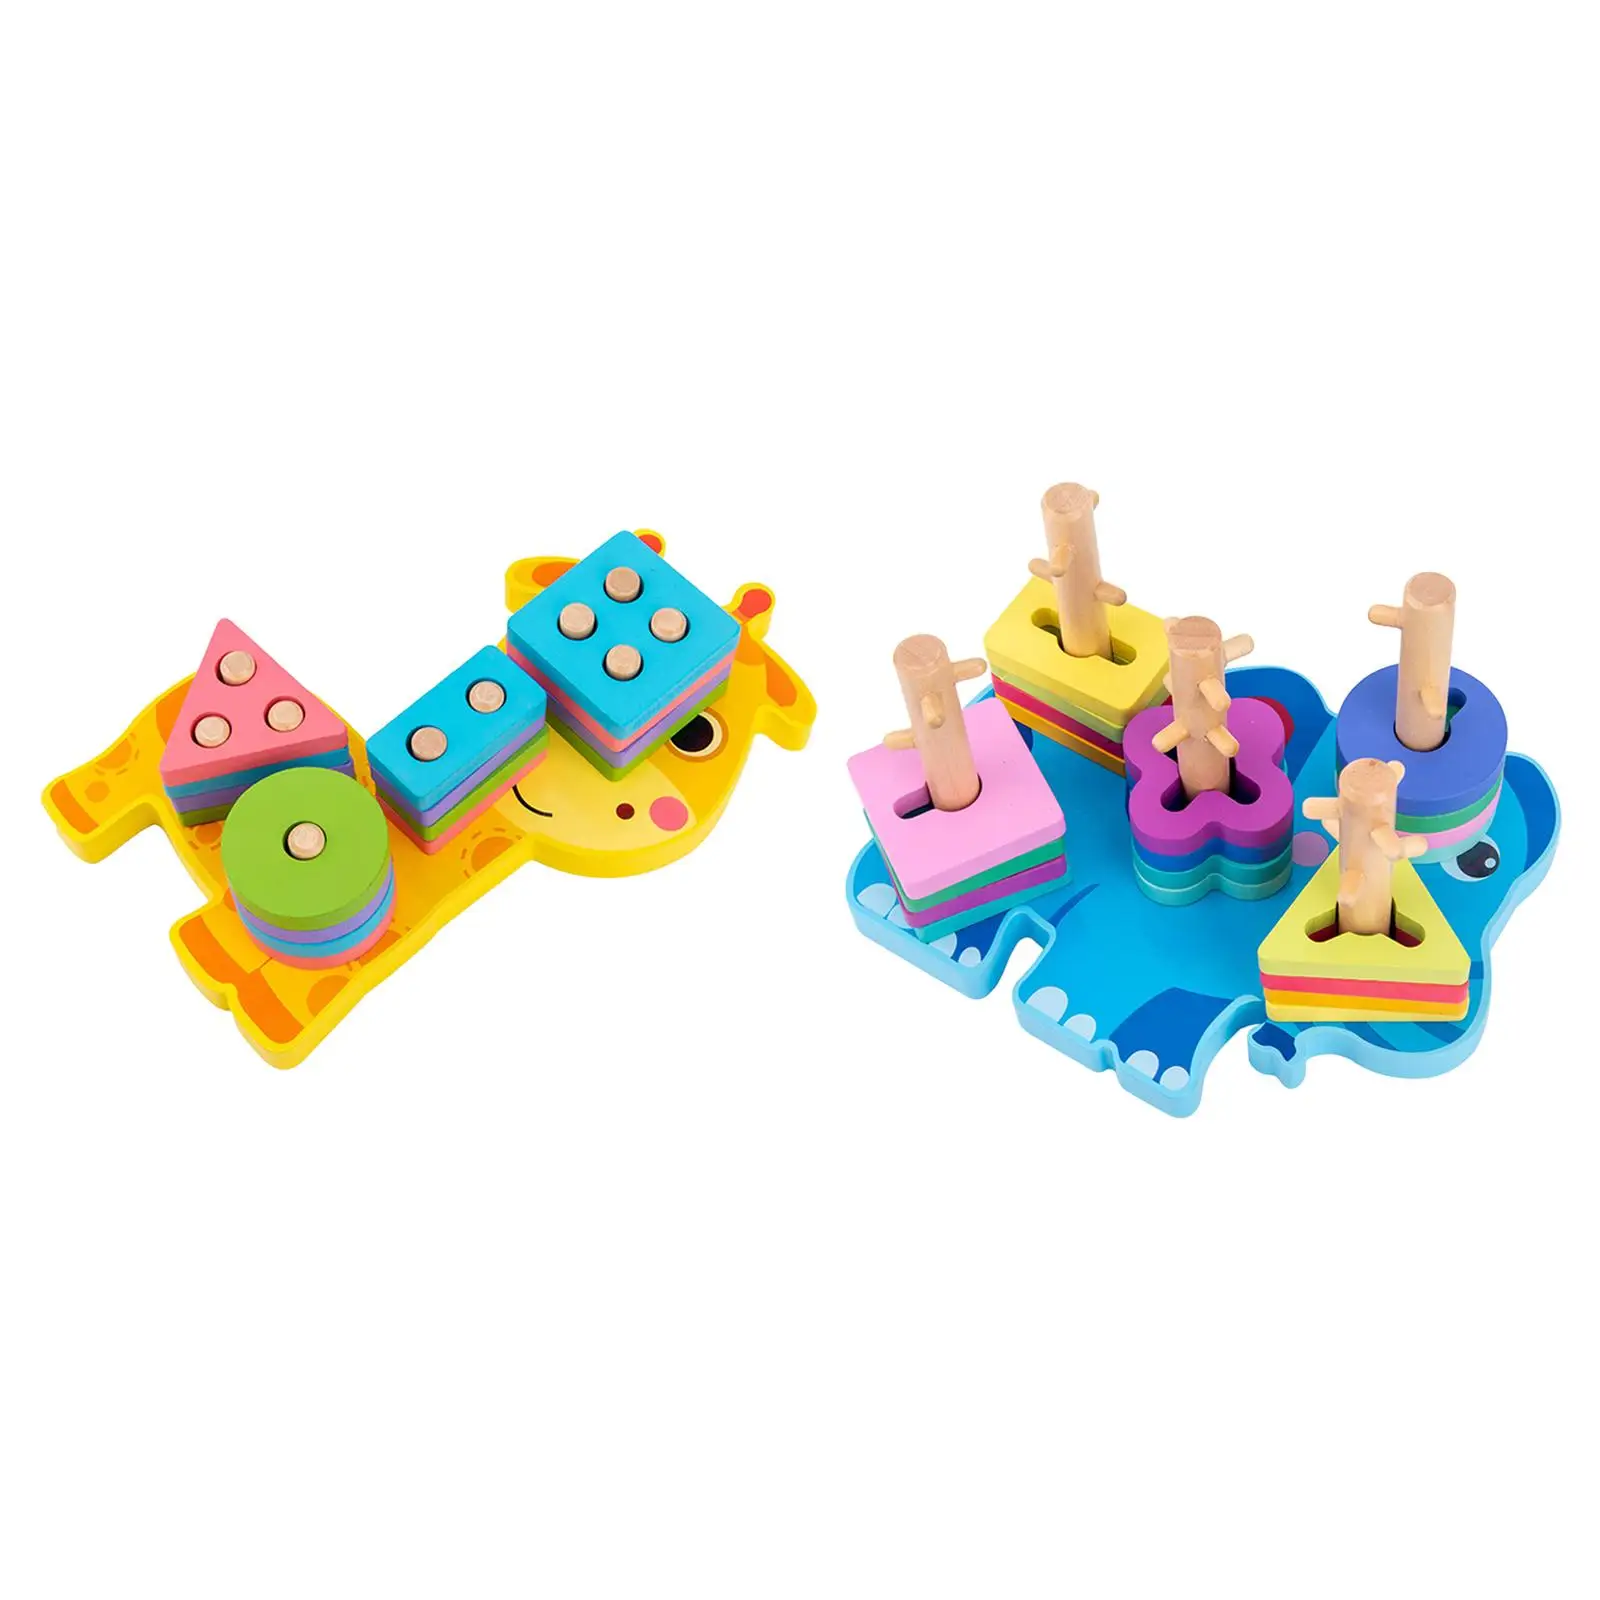 Baby Montessori Wooden Shape Matching Stacking Blocks Toys Color Cognitive Sensory Toys Developmental for Children 1-2 Years Old